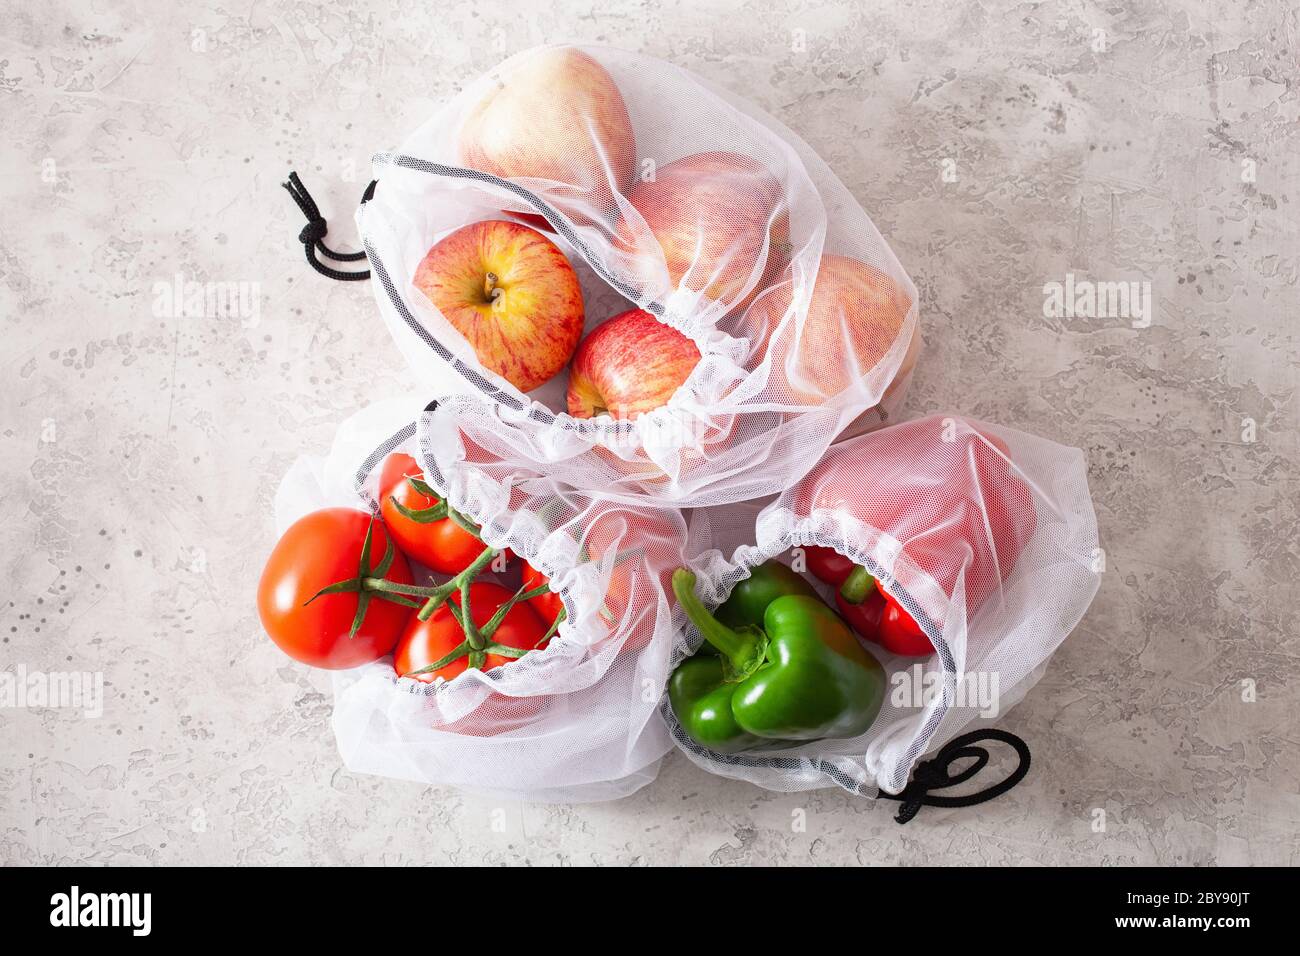 Apple fruit in plastic bag on wood table Stock Photo by ©jannystockphoto  77413662